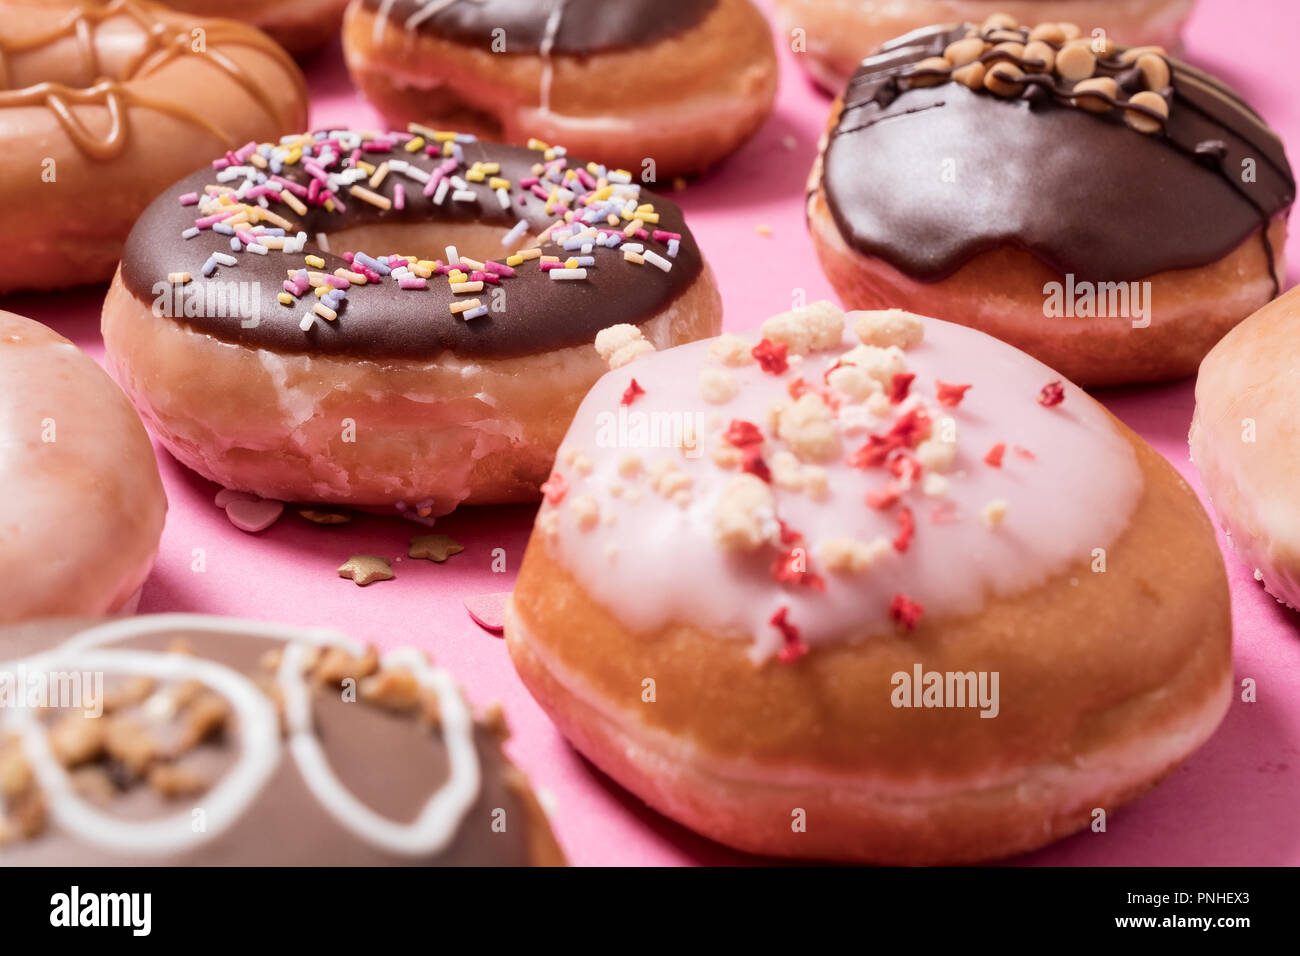 Assorted donuts on a pink background.  Includes classic chocolate sprinkles donut as well as strawberries and cream with scattered sprinkles and heart Stock Photo